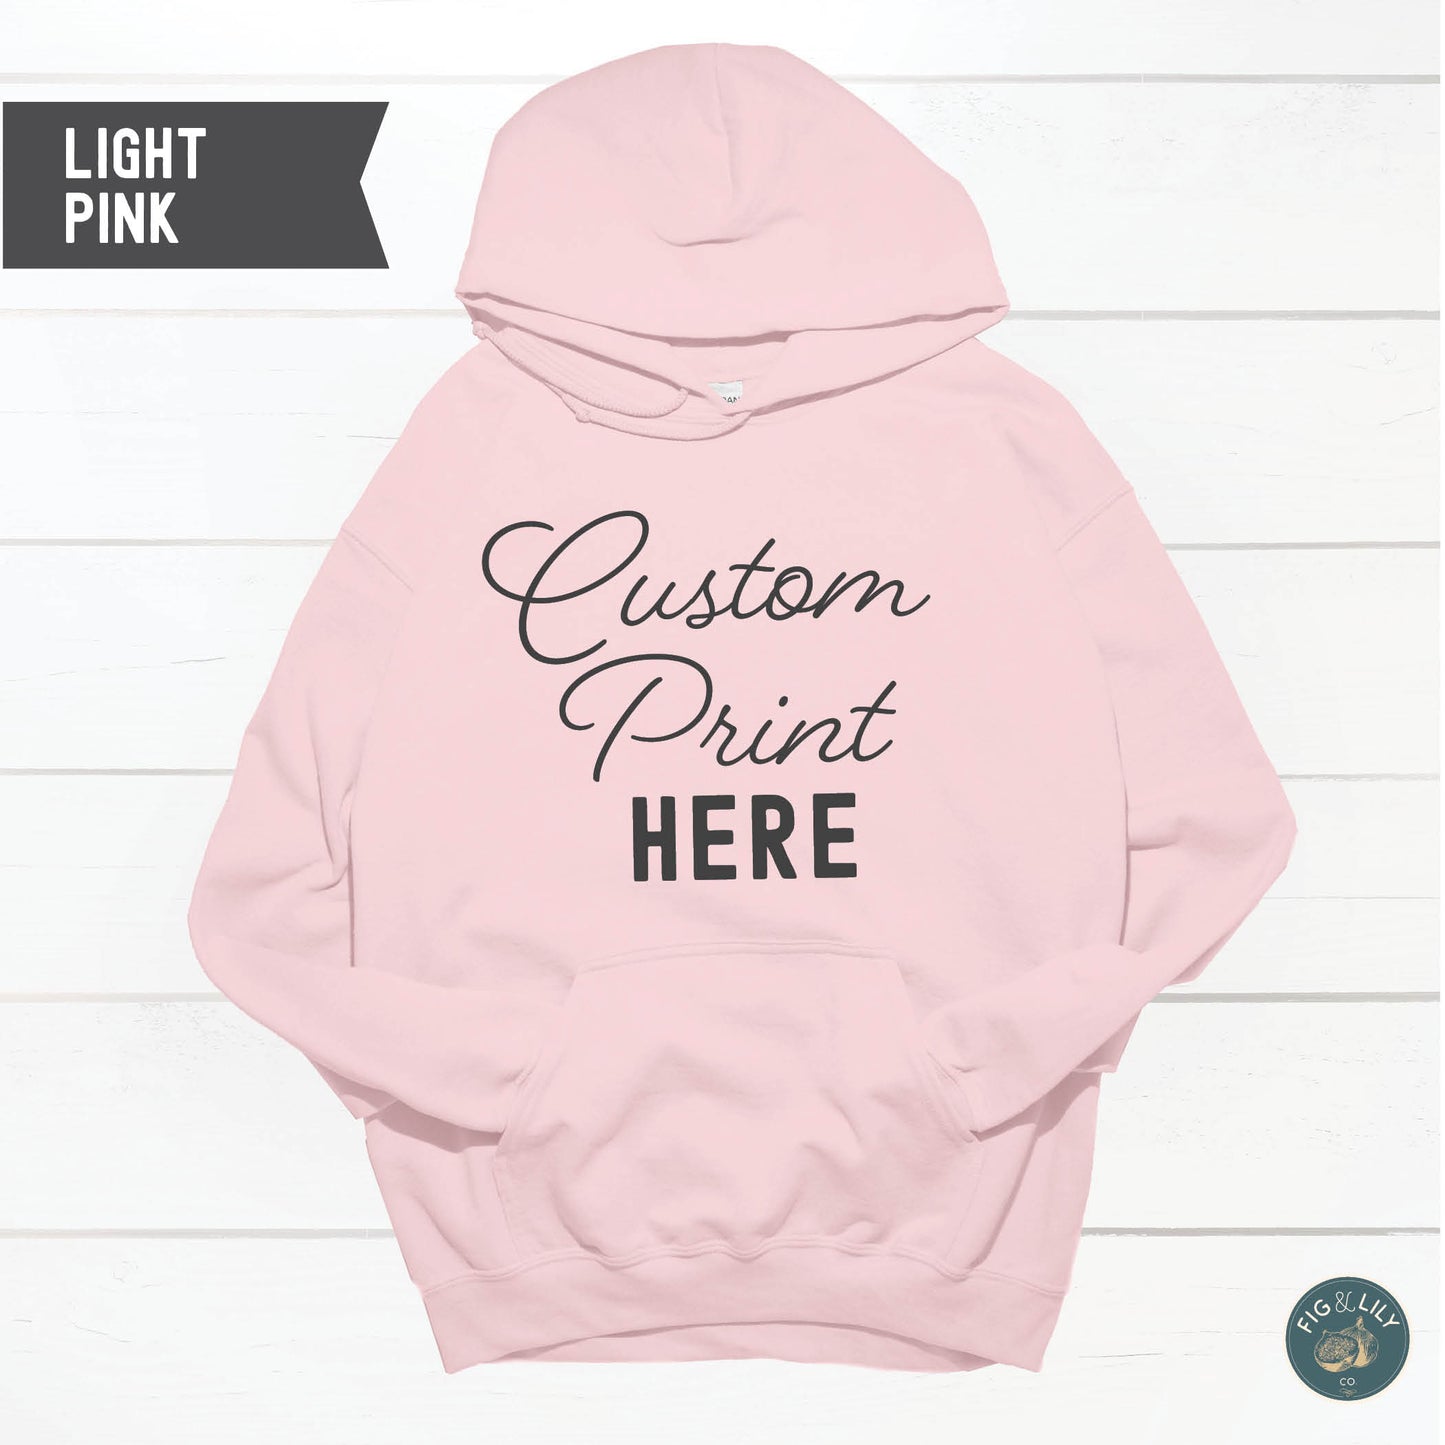 Light Pink Unisex Hoodie, Custom Printed sweatshirt Design, Your Design Here, Personalized Design created just for you, digital proof approval included